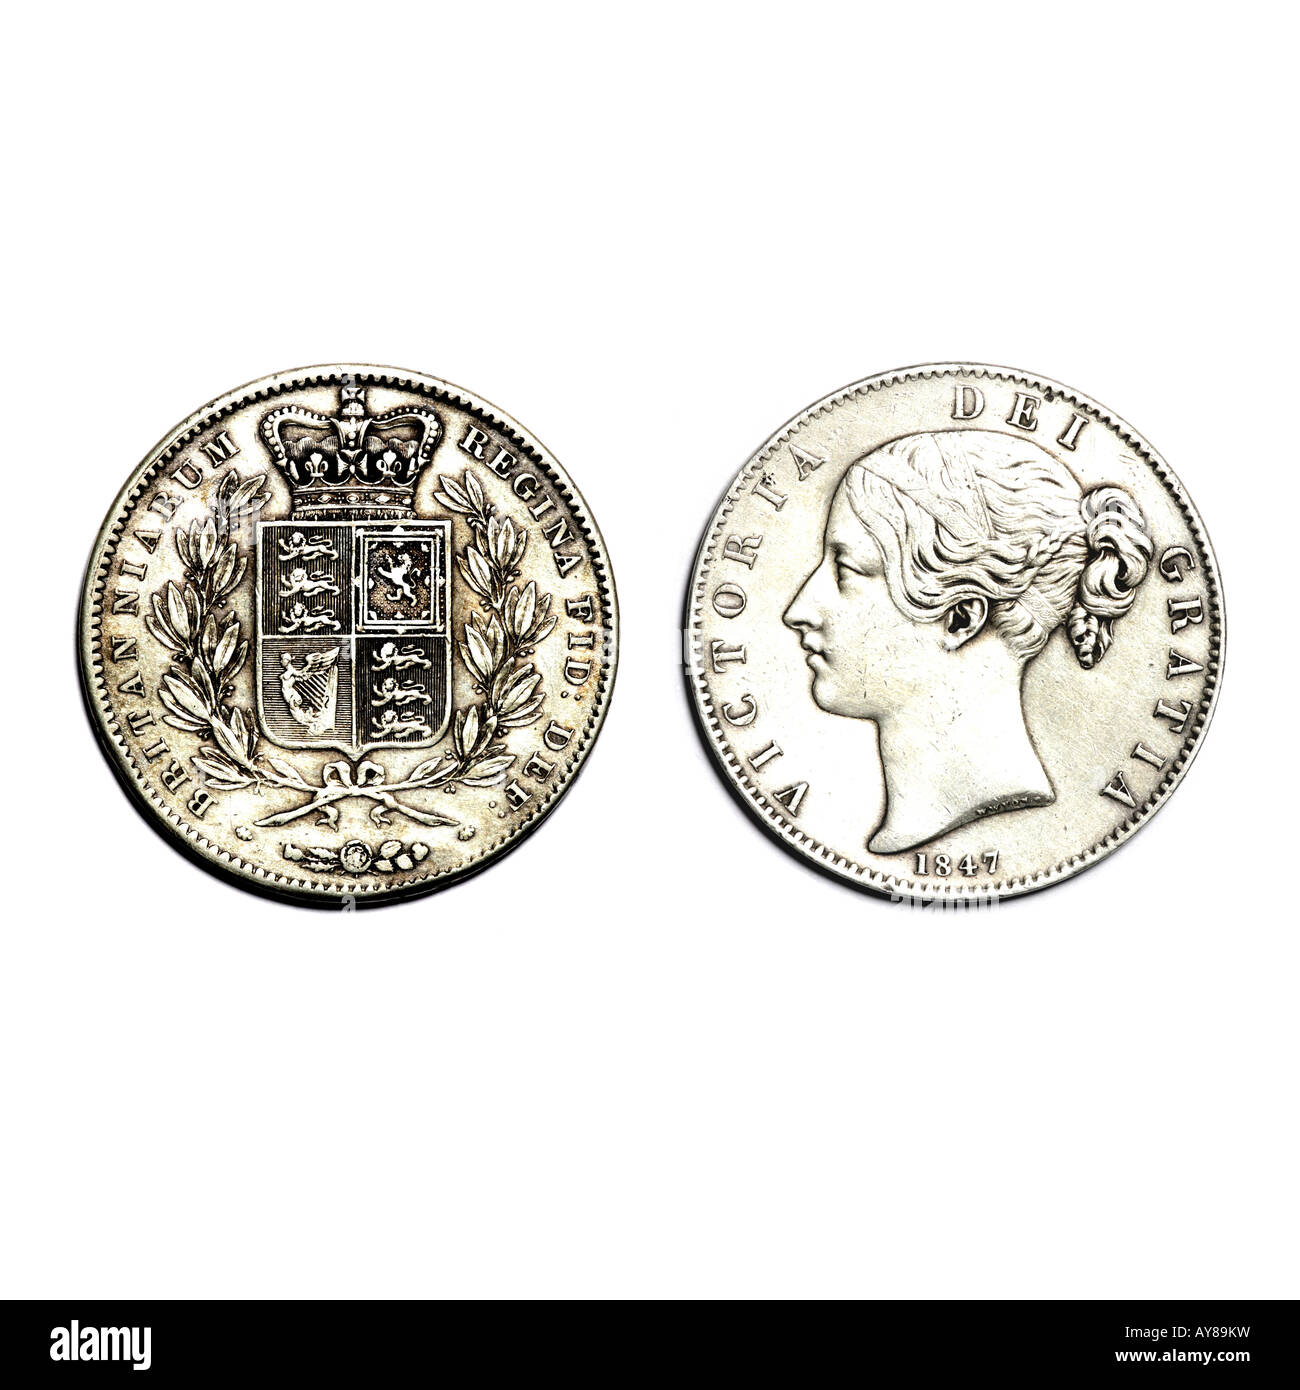 'VICTORIAN CROWN: YOUNG HEAD 1847 OBVERSE AND REVERSE' Stock Photo